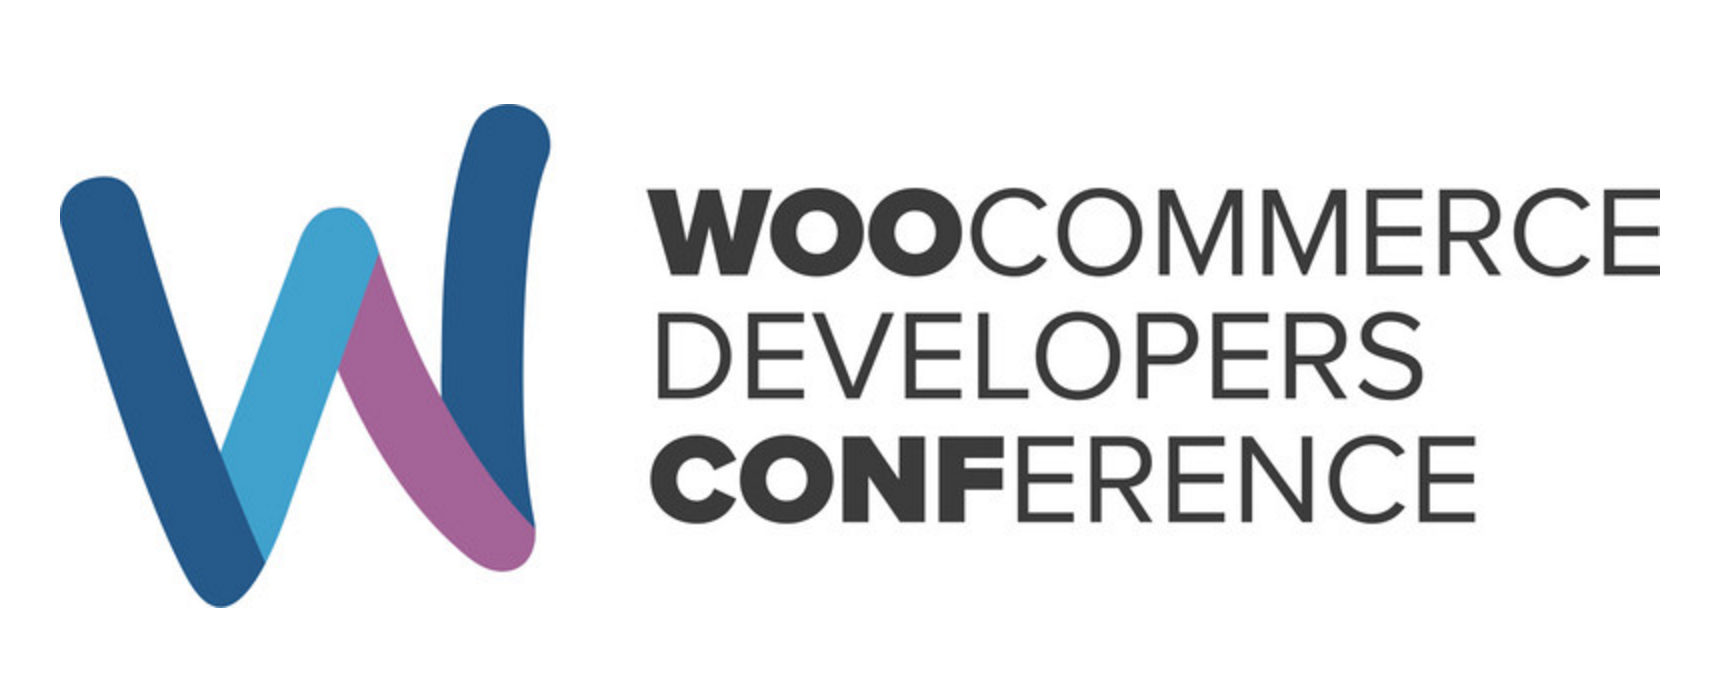 Seattle to Host WooConf 2017 in October, Conference to Focus on Developers